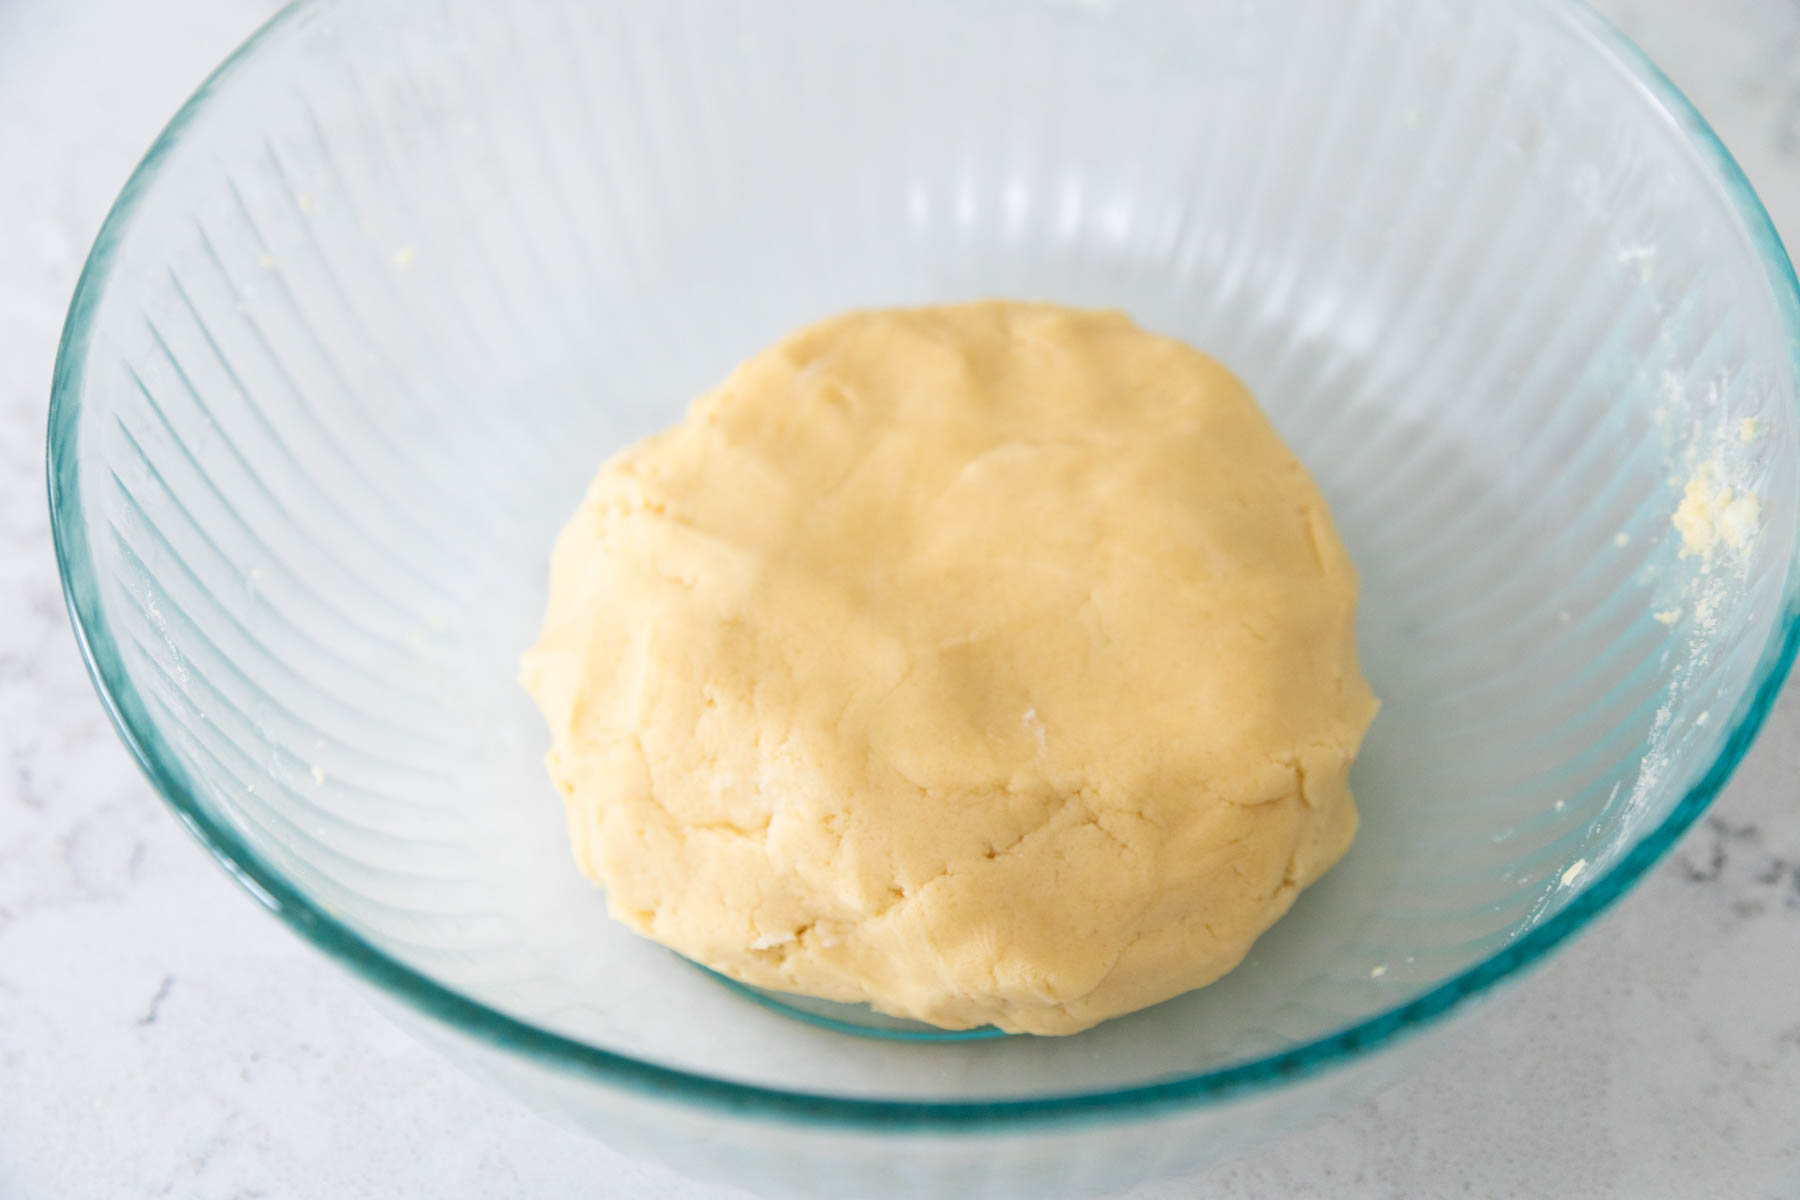 The finished ball of sugar cookie dough rests in a mixing bowl.